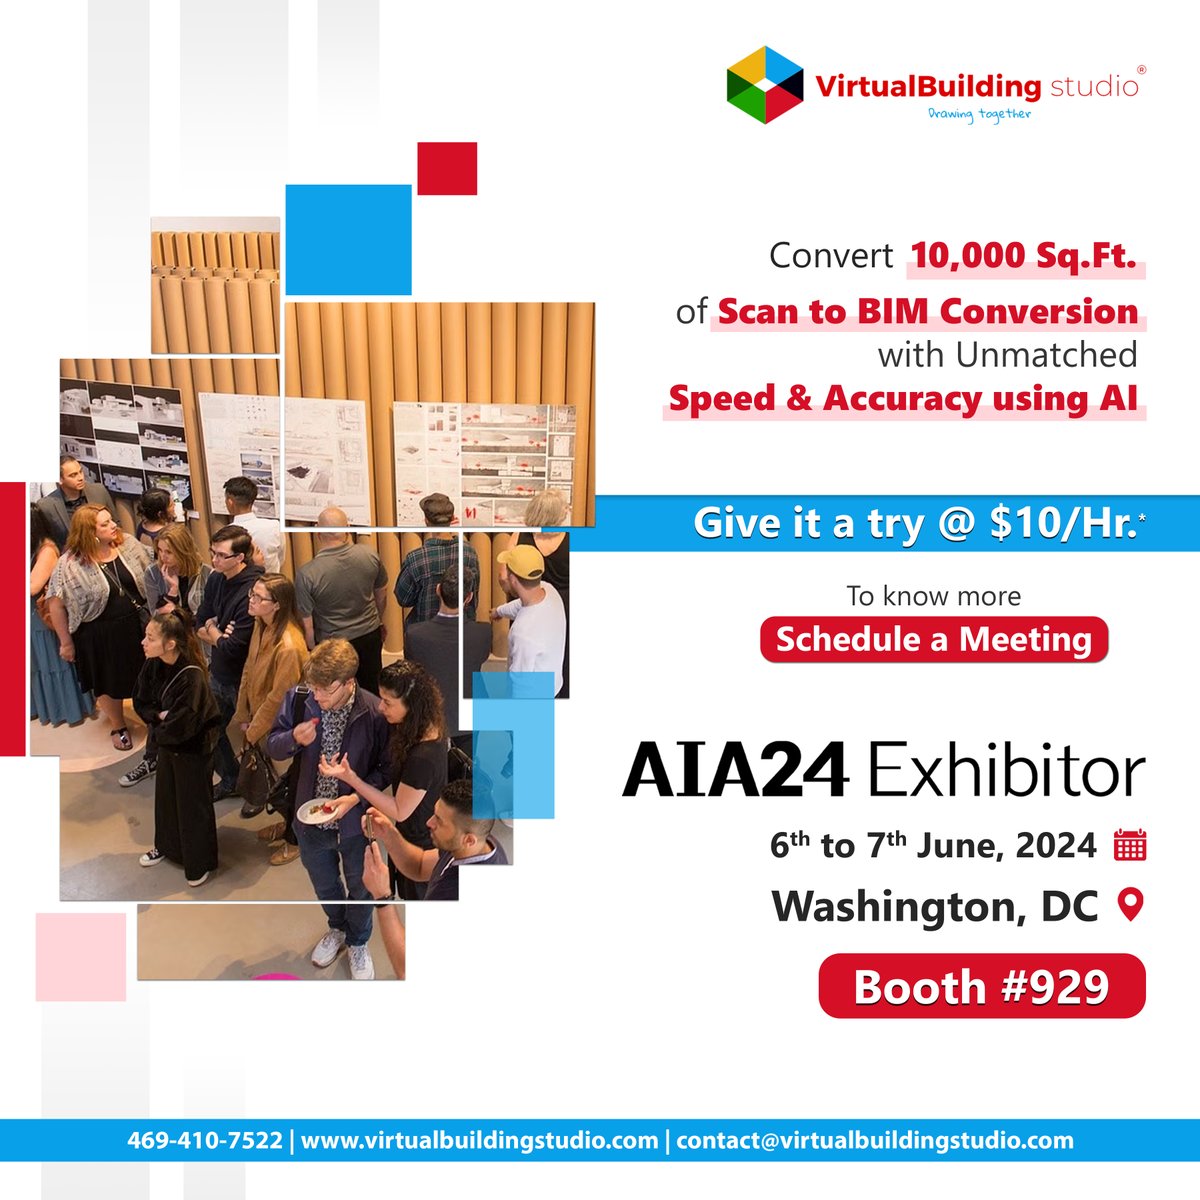 Only 20 days left until AIA'24! 🎉
Join us on June 6th & 7th at Booth #929 in Washington DC. Discover the power of our lightning-fast Scan to BIM Service for just $10/Hr, driven by unbeatable speed and accuracy through AI.
Schedule a meeting:  bit.ly/3Uvju0F
#AIA2024